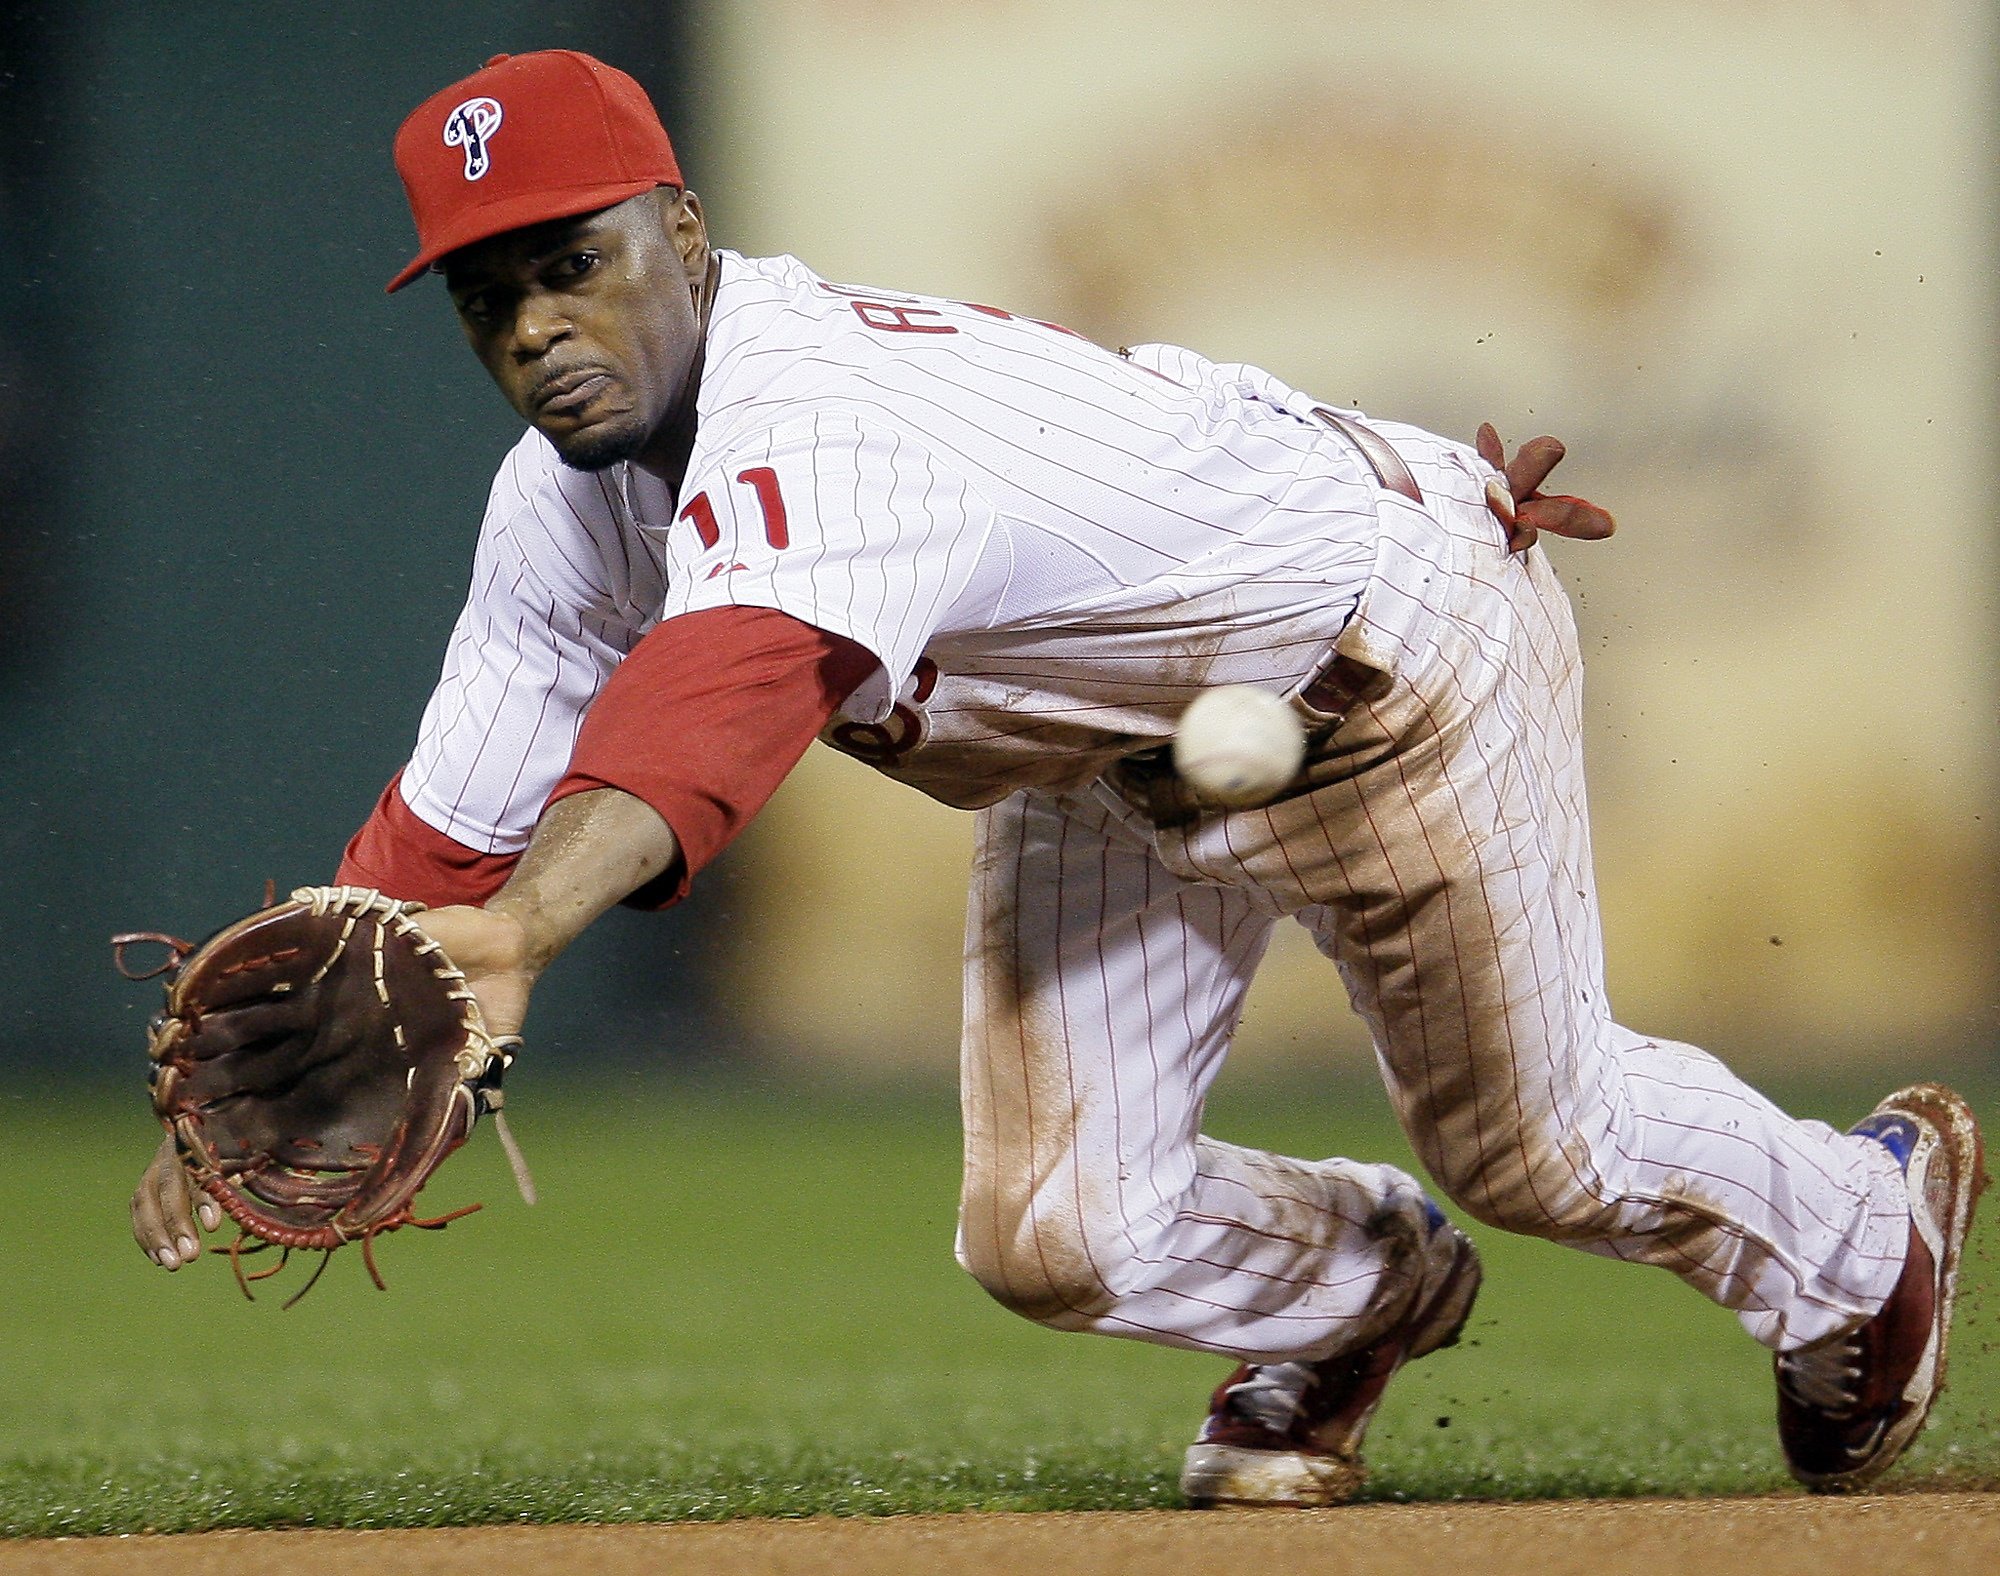 Jimmy Rollins receives minor league contract from Giants